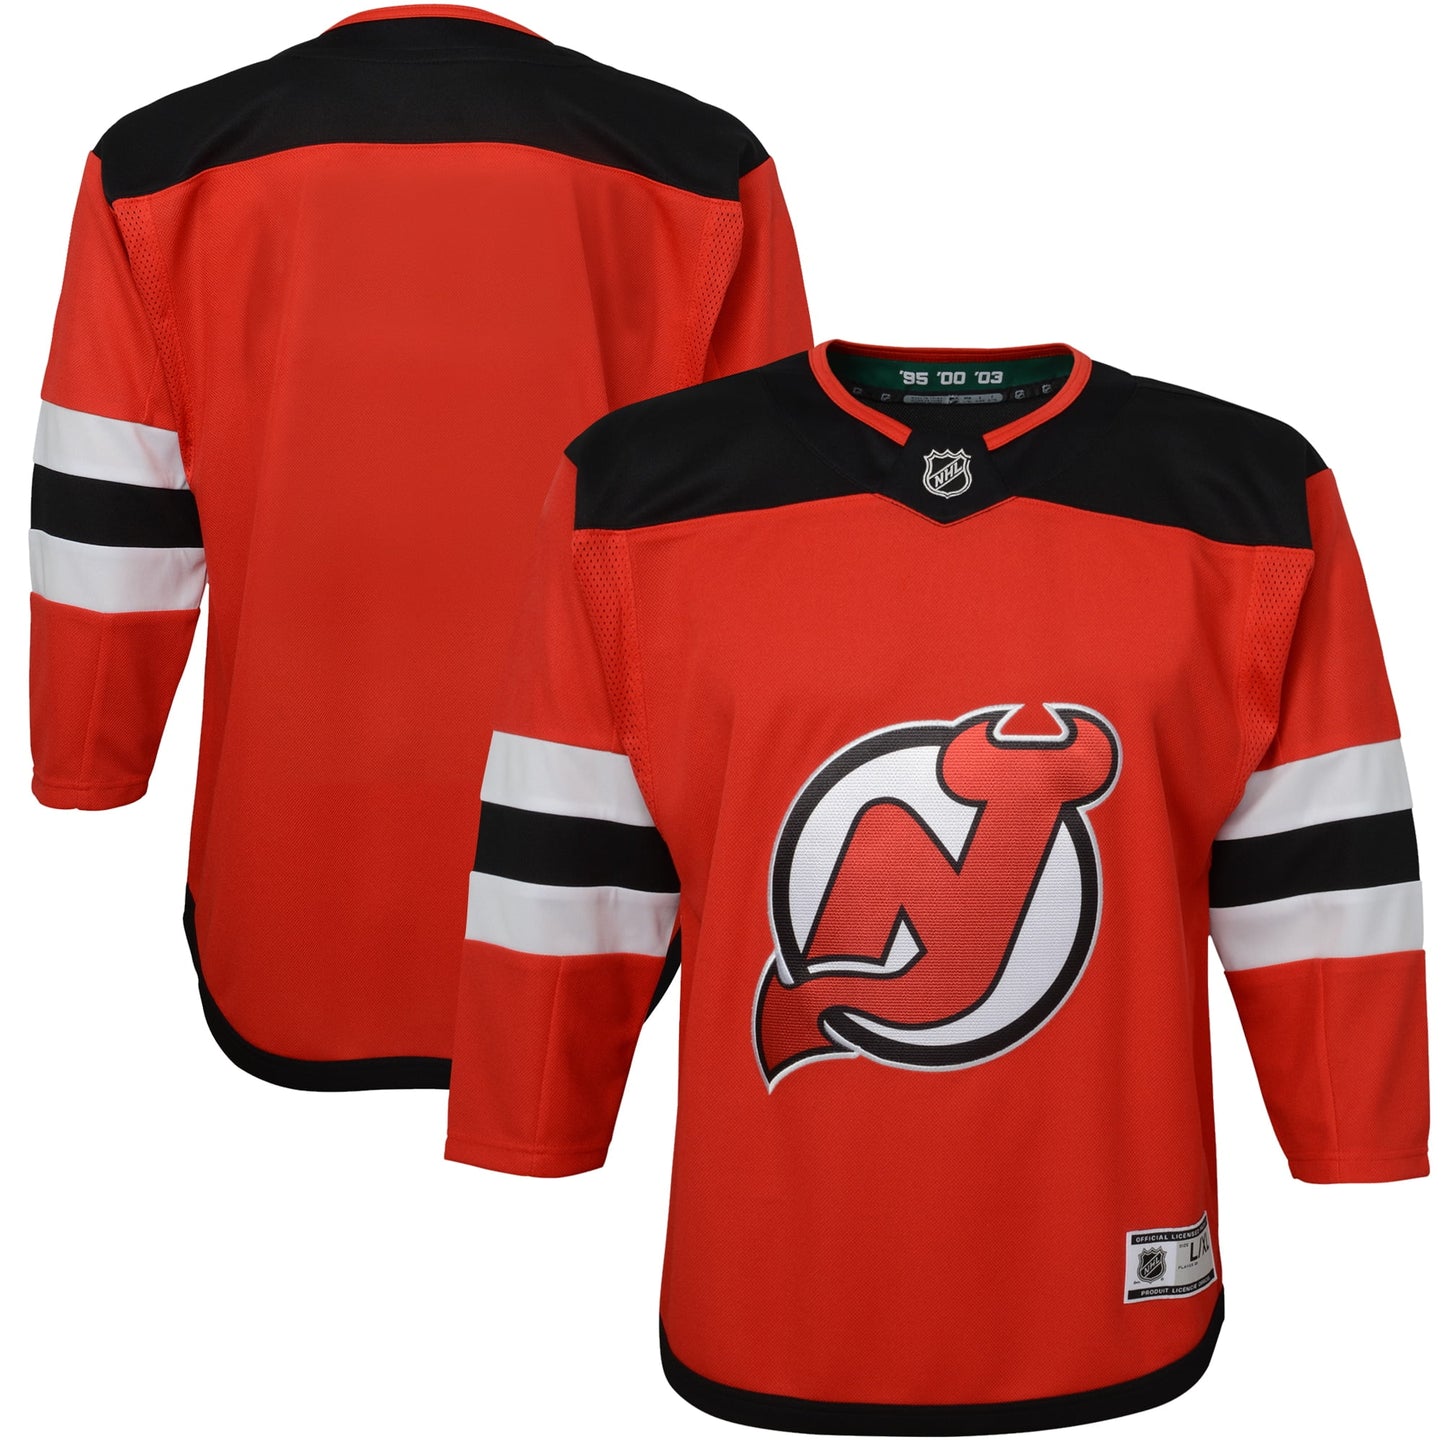 Youth Red New Jersey Devils Home Premier Blank Jersey